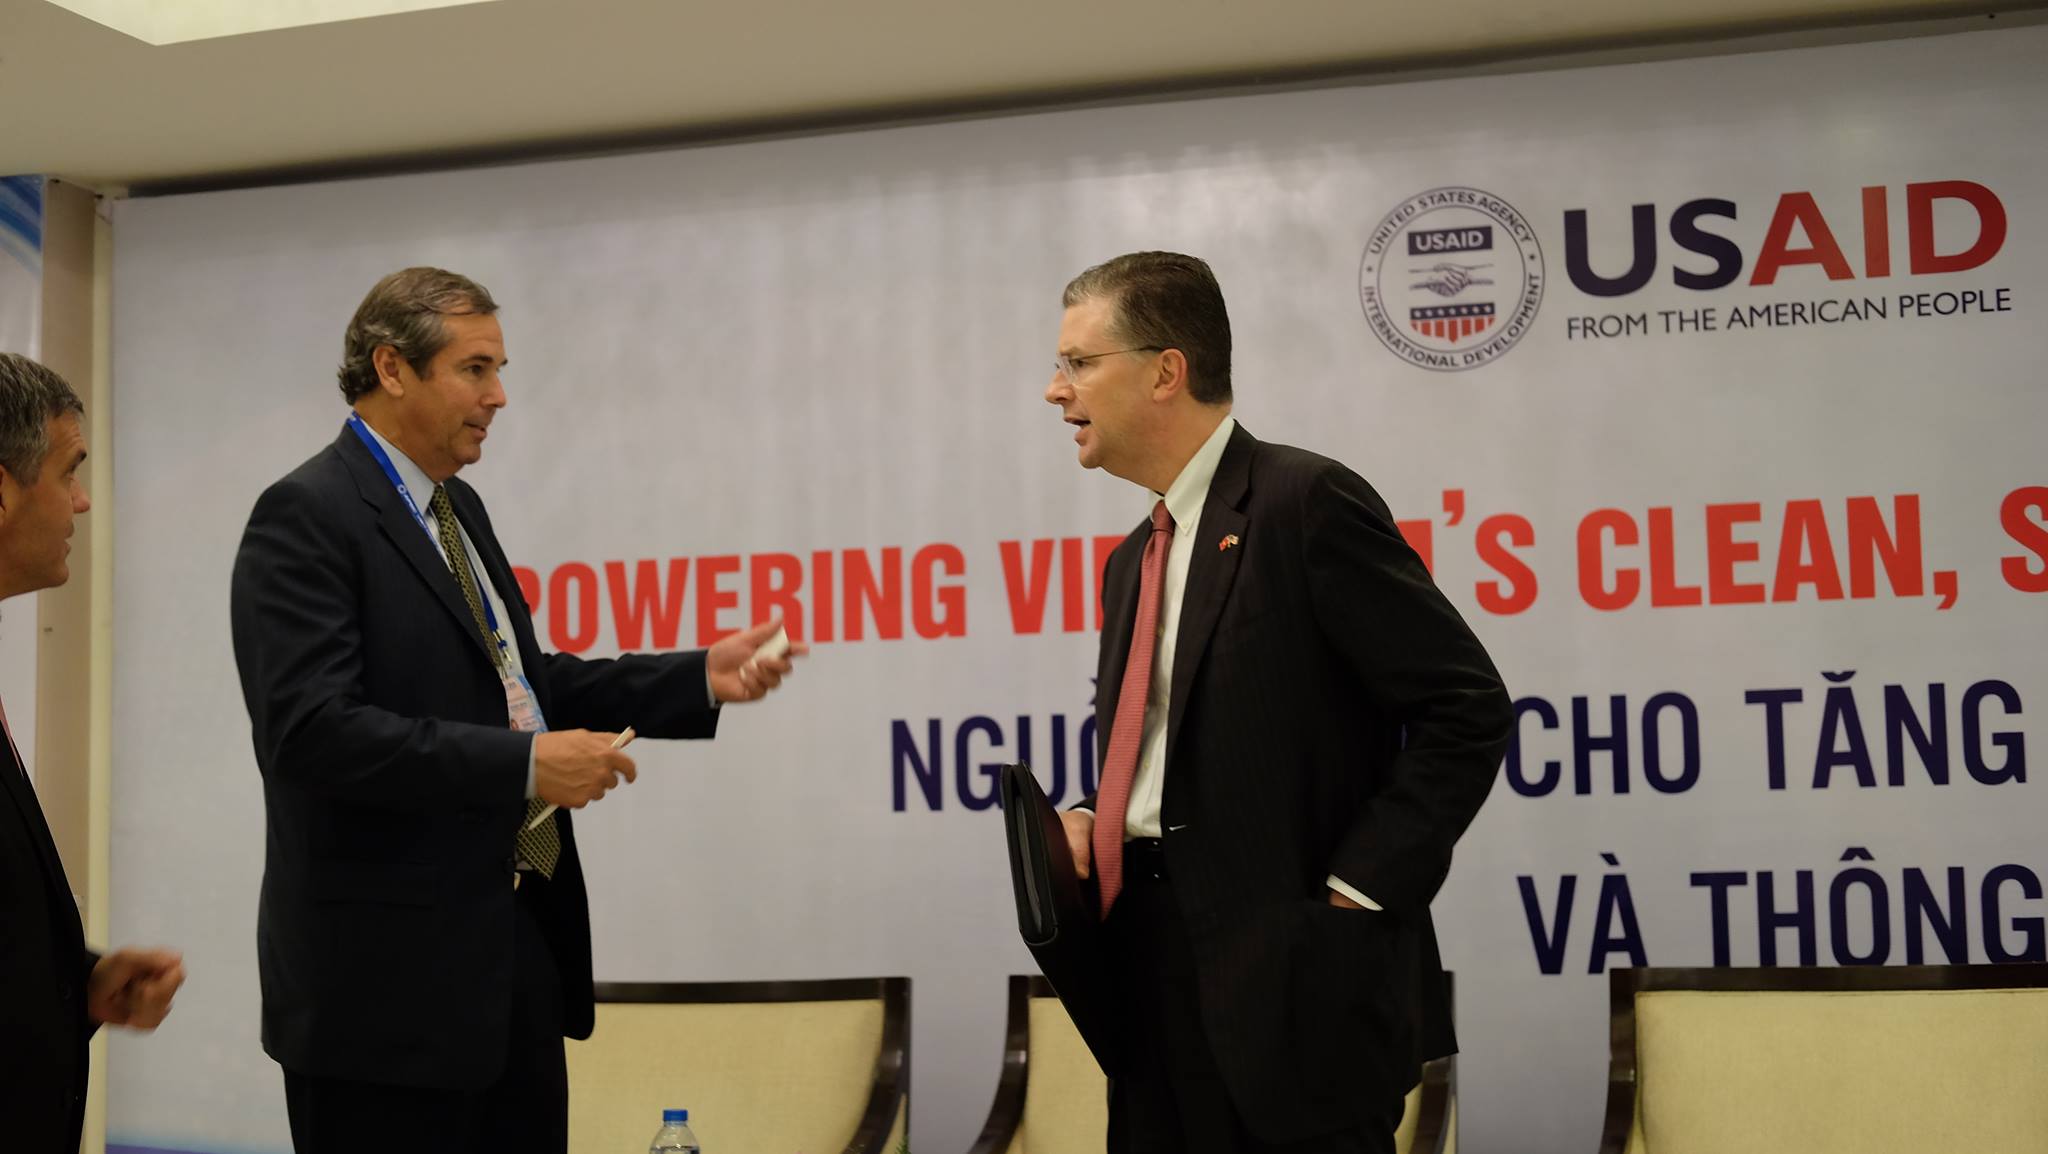 U.S. Ambassador to Vietnam Daniel Kritenbrink (right) is seen at the event. Photo: Son Luong/Tuoi Tre News